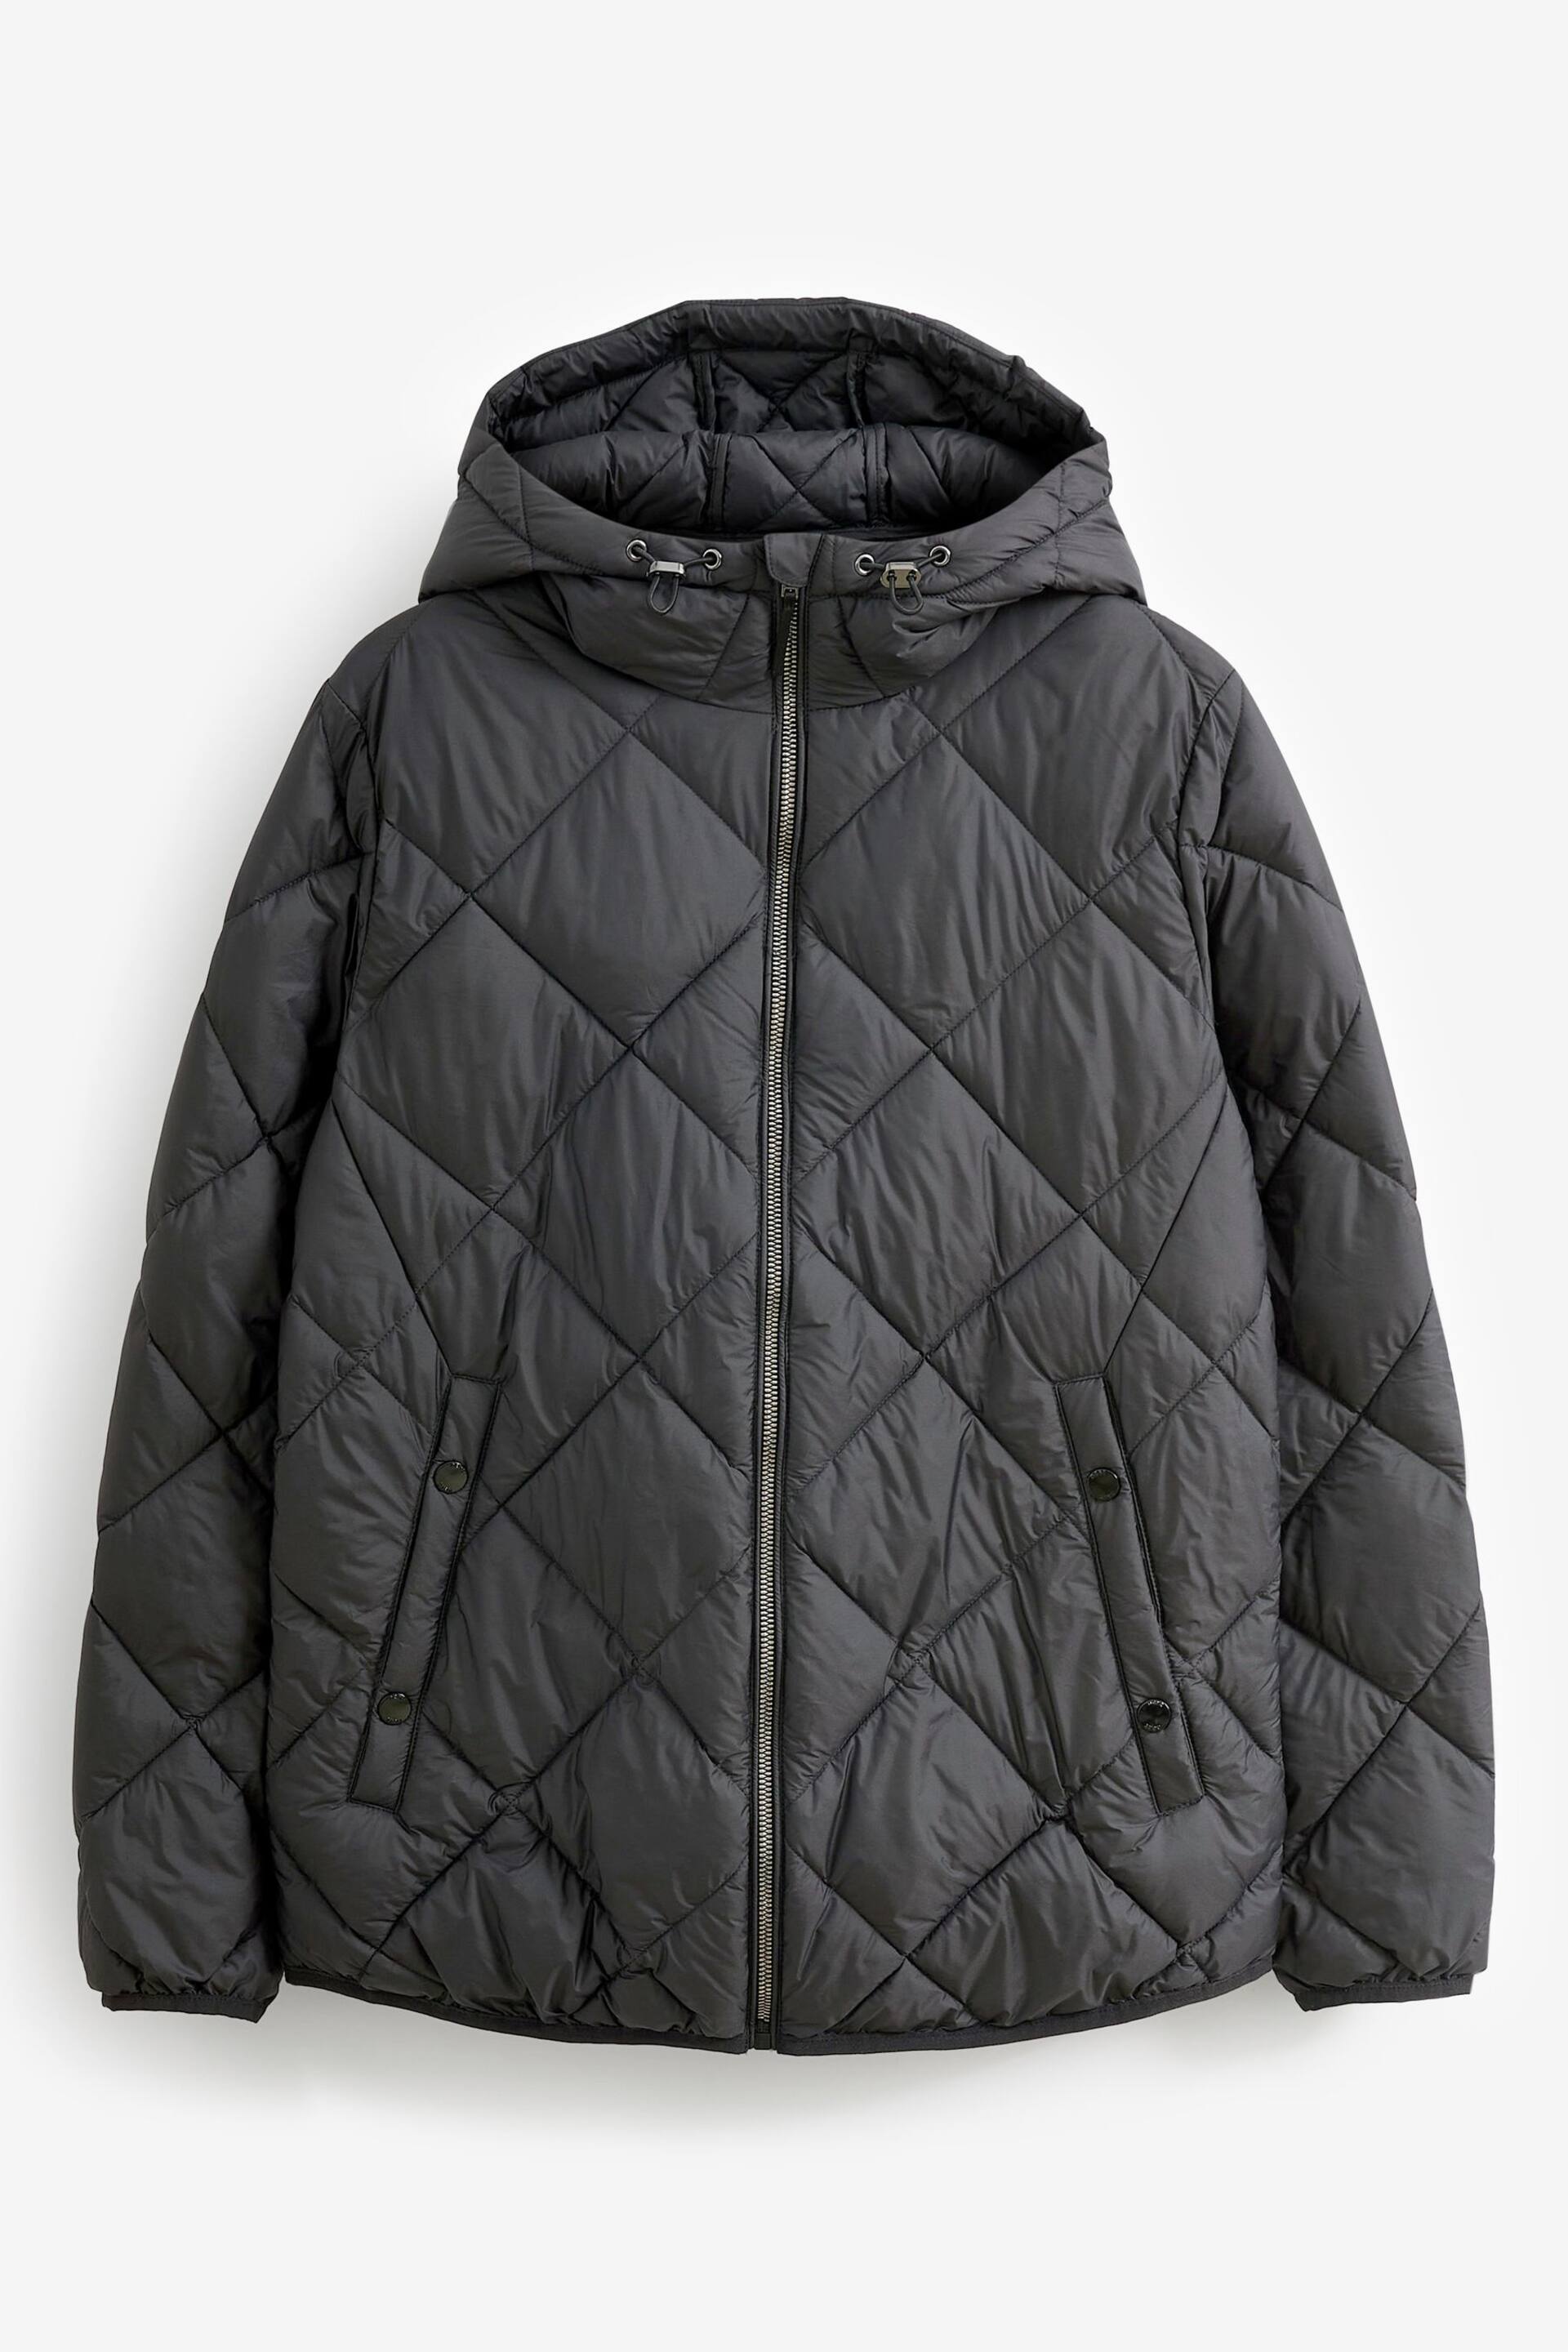 Black Quilted Lightweight Jacket - Image 5 of 6